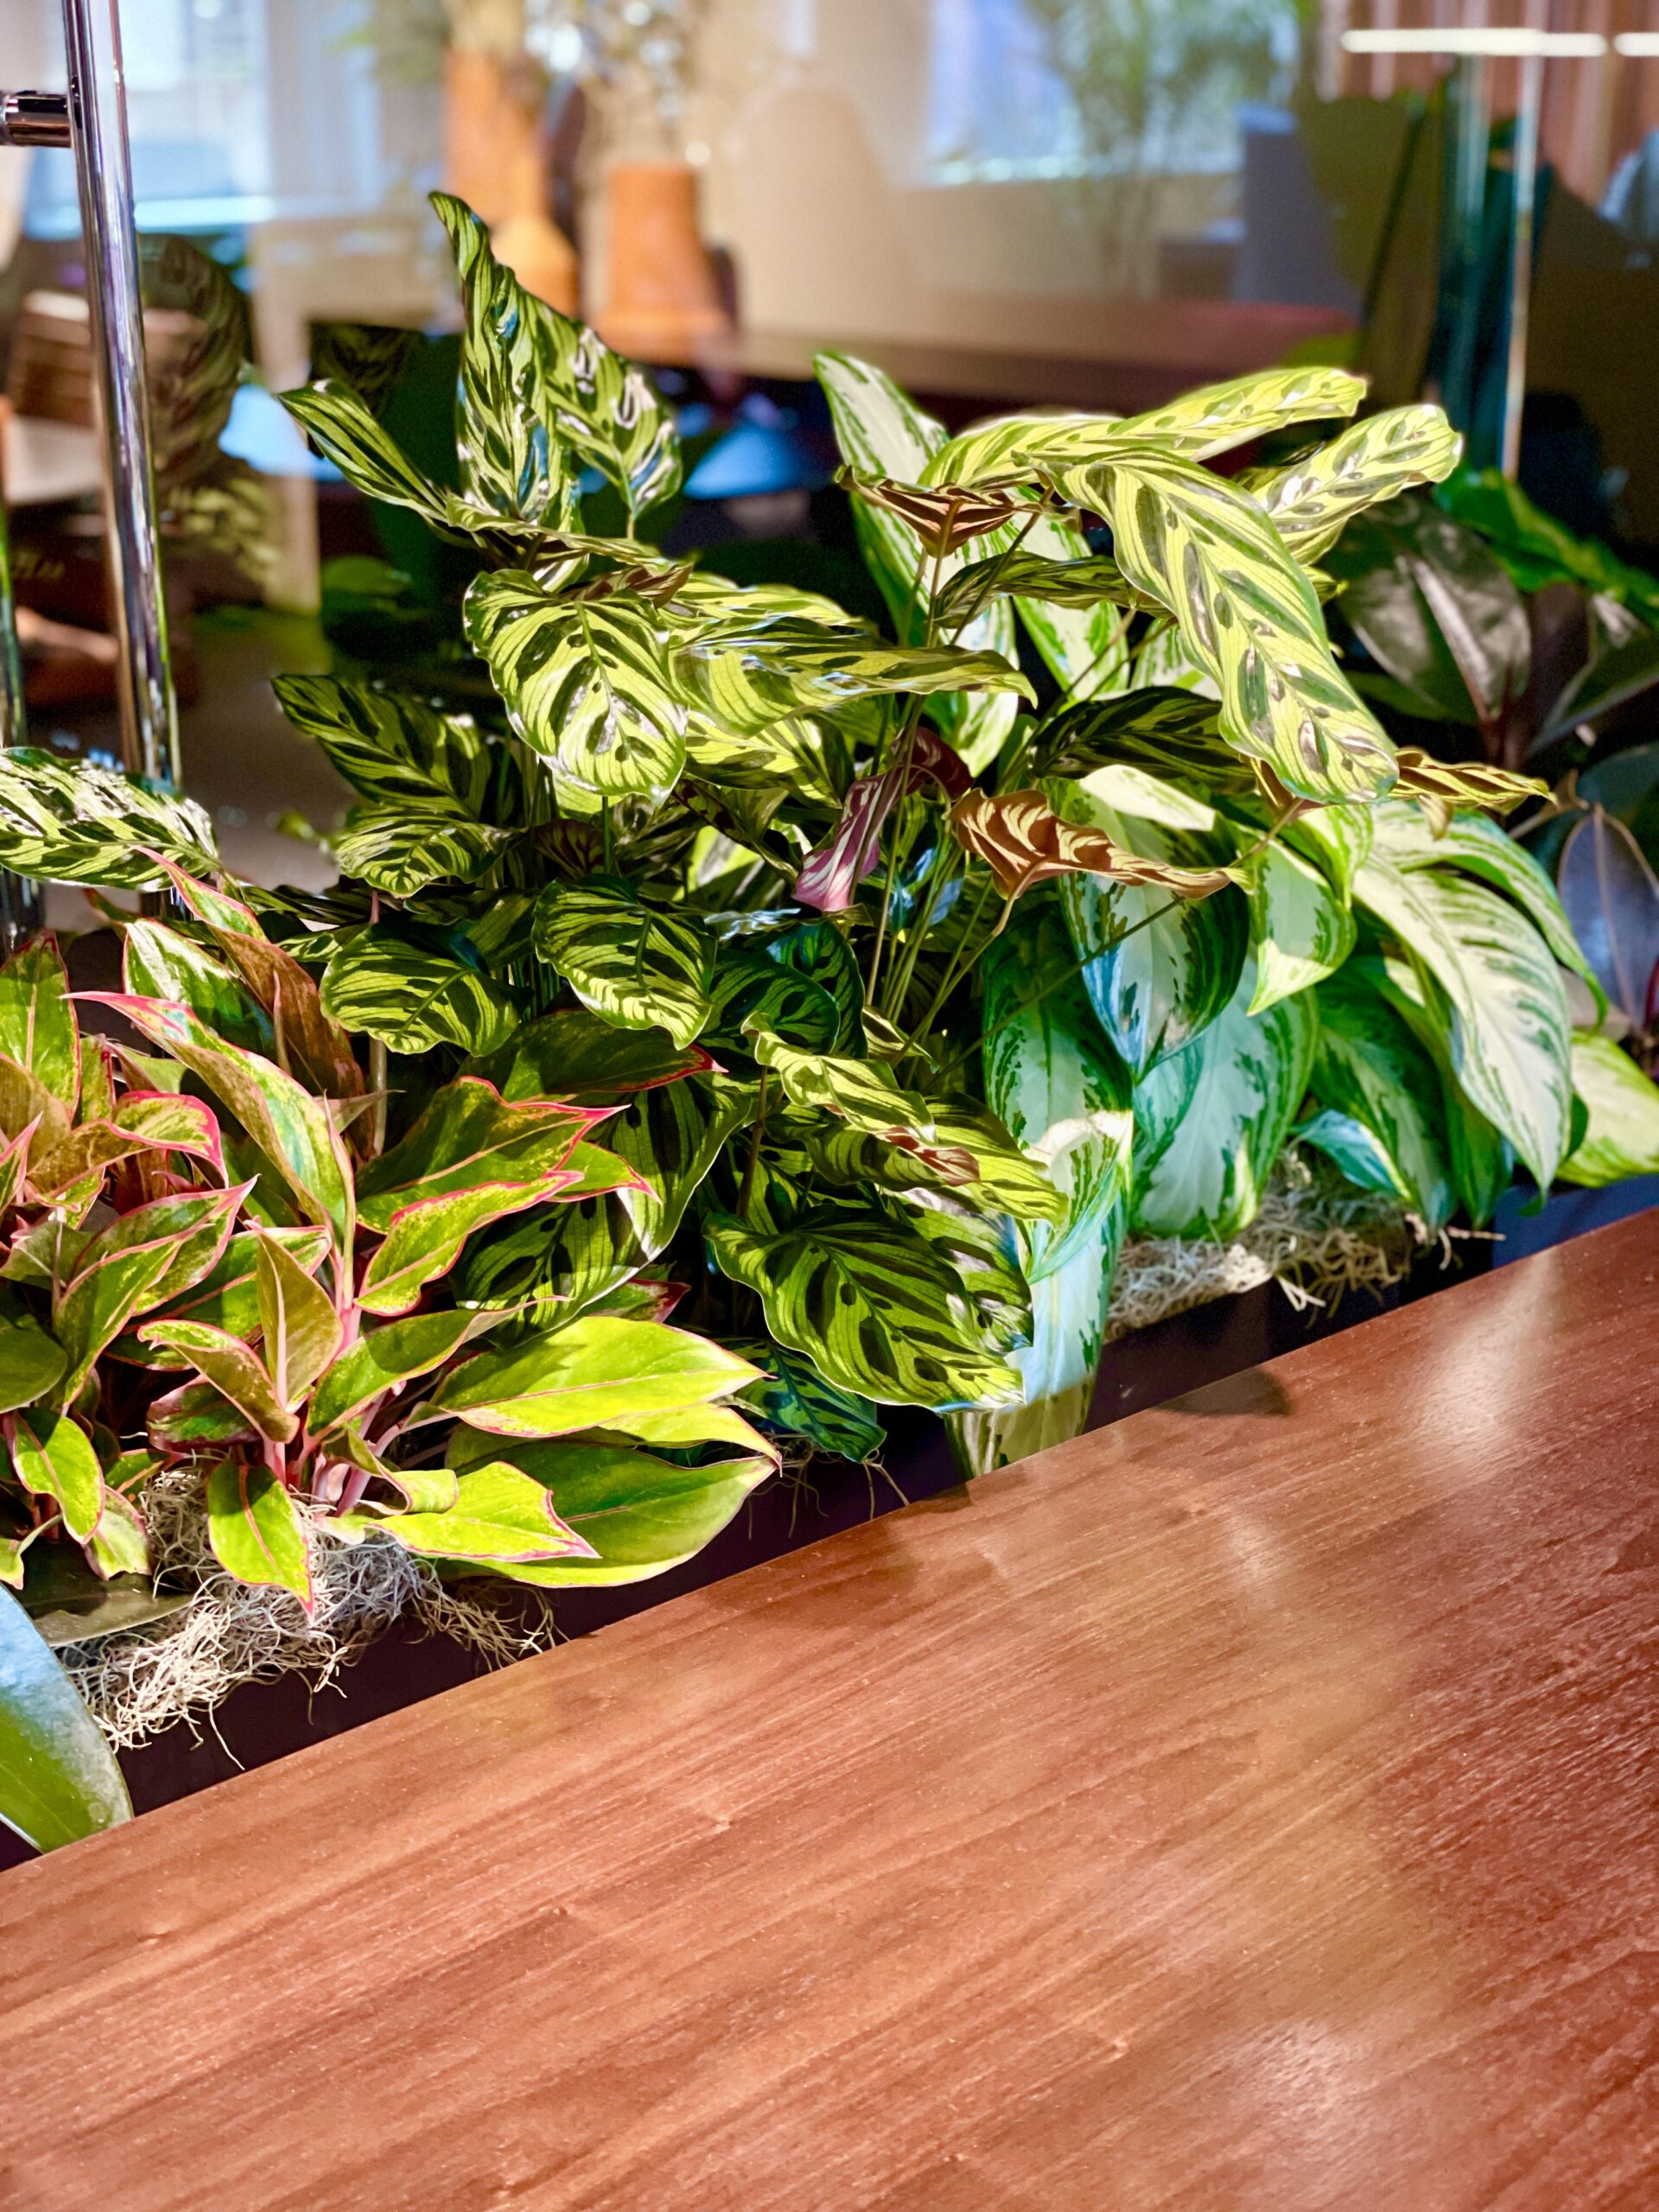 Calatheas and Aglaonemas arranged in a long container in an office